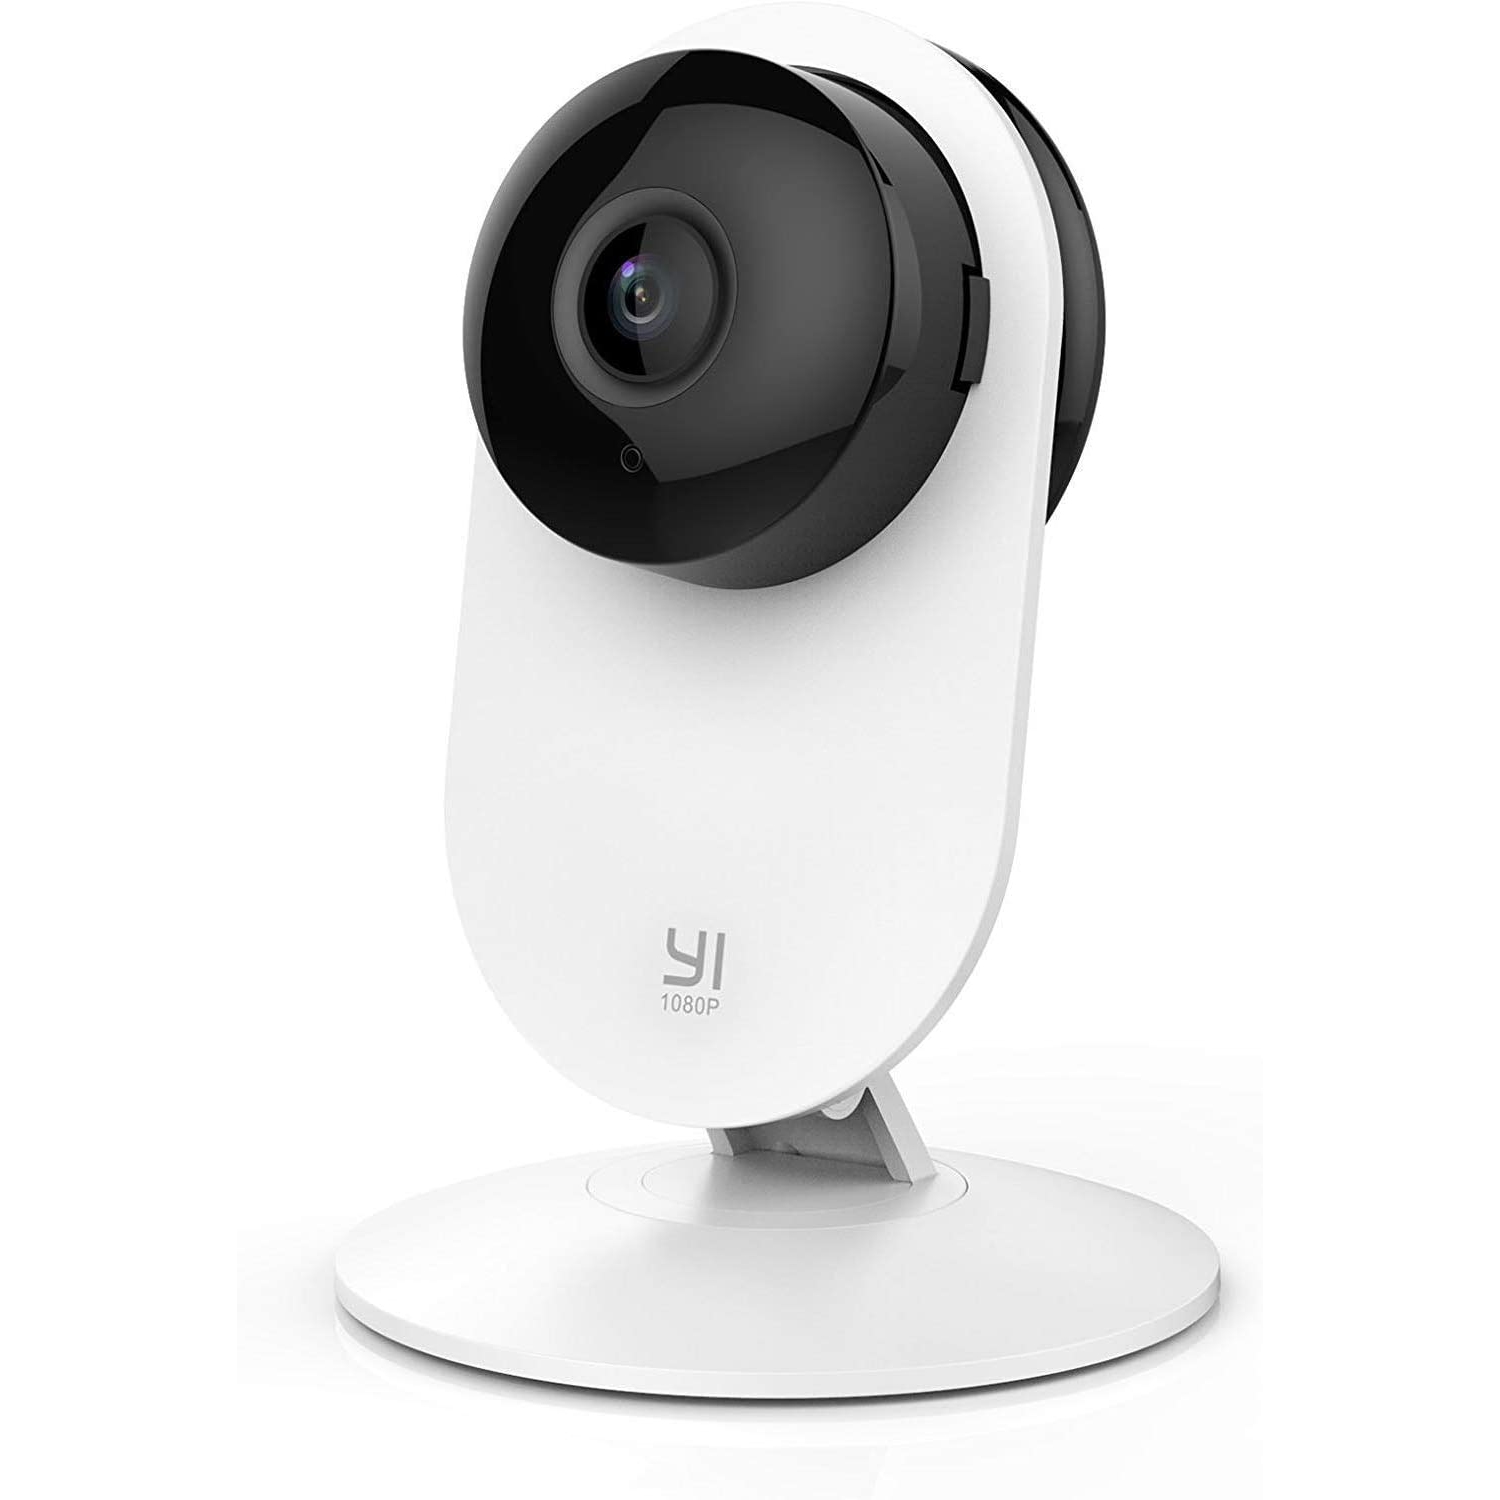 YI 1080p Home Camera, Indoor Wireless IP Security Surveillance System with Night Vision